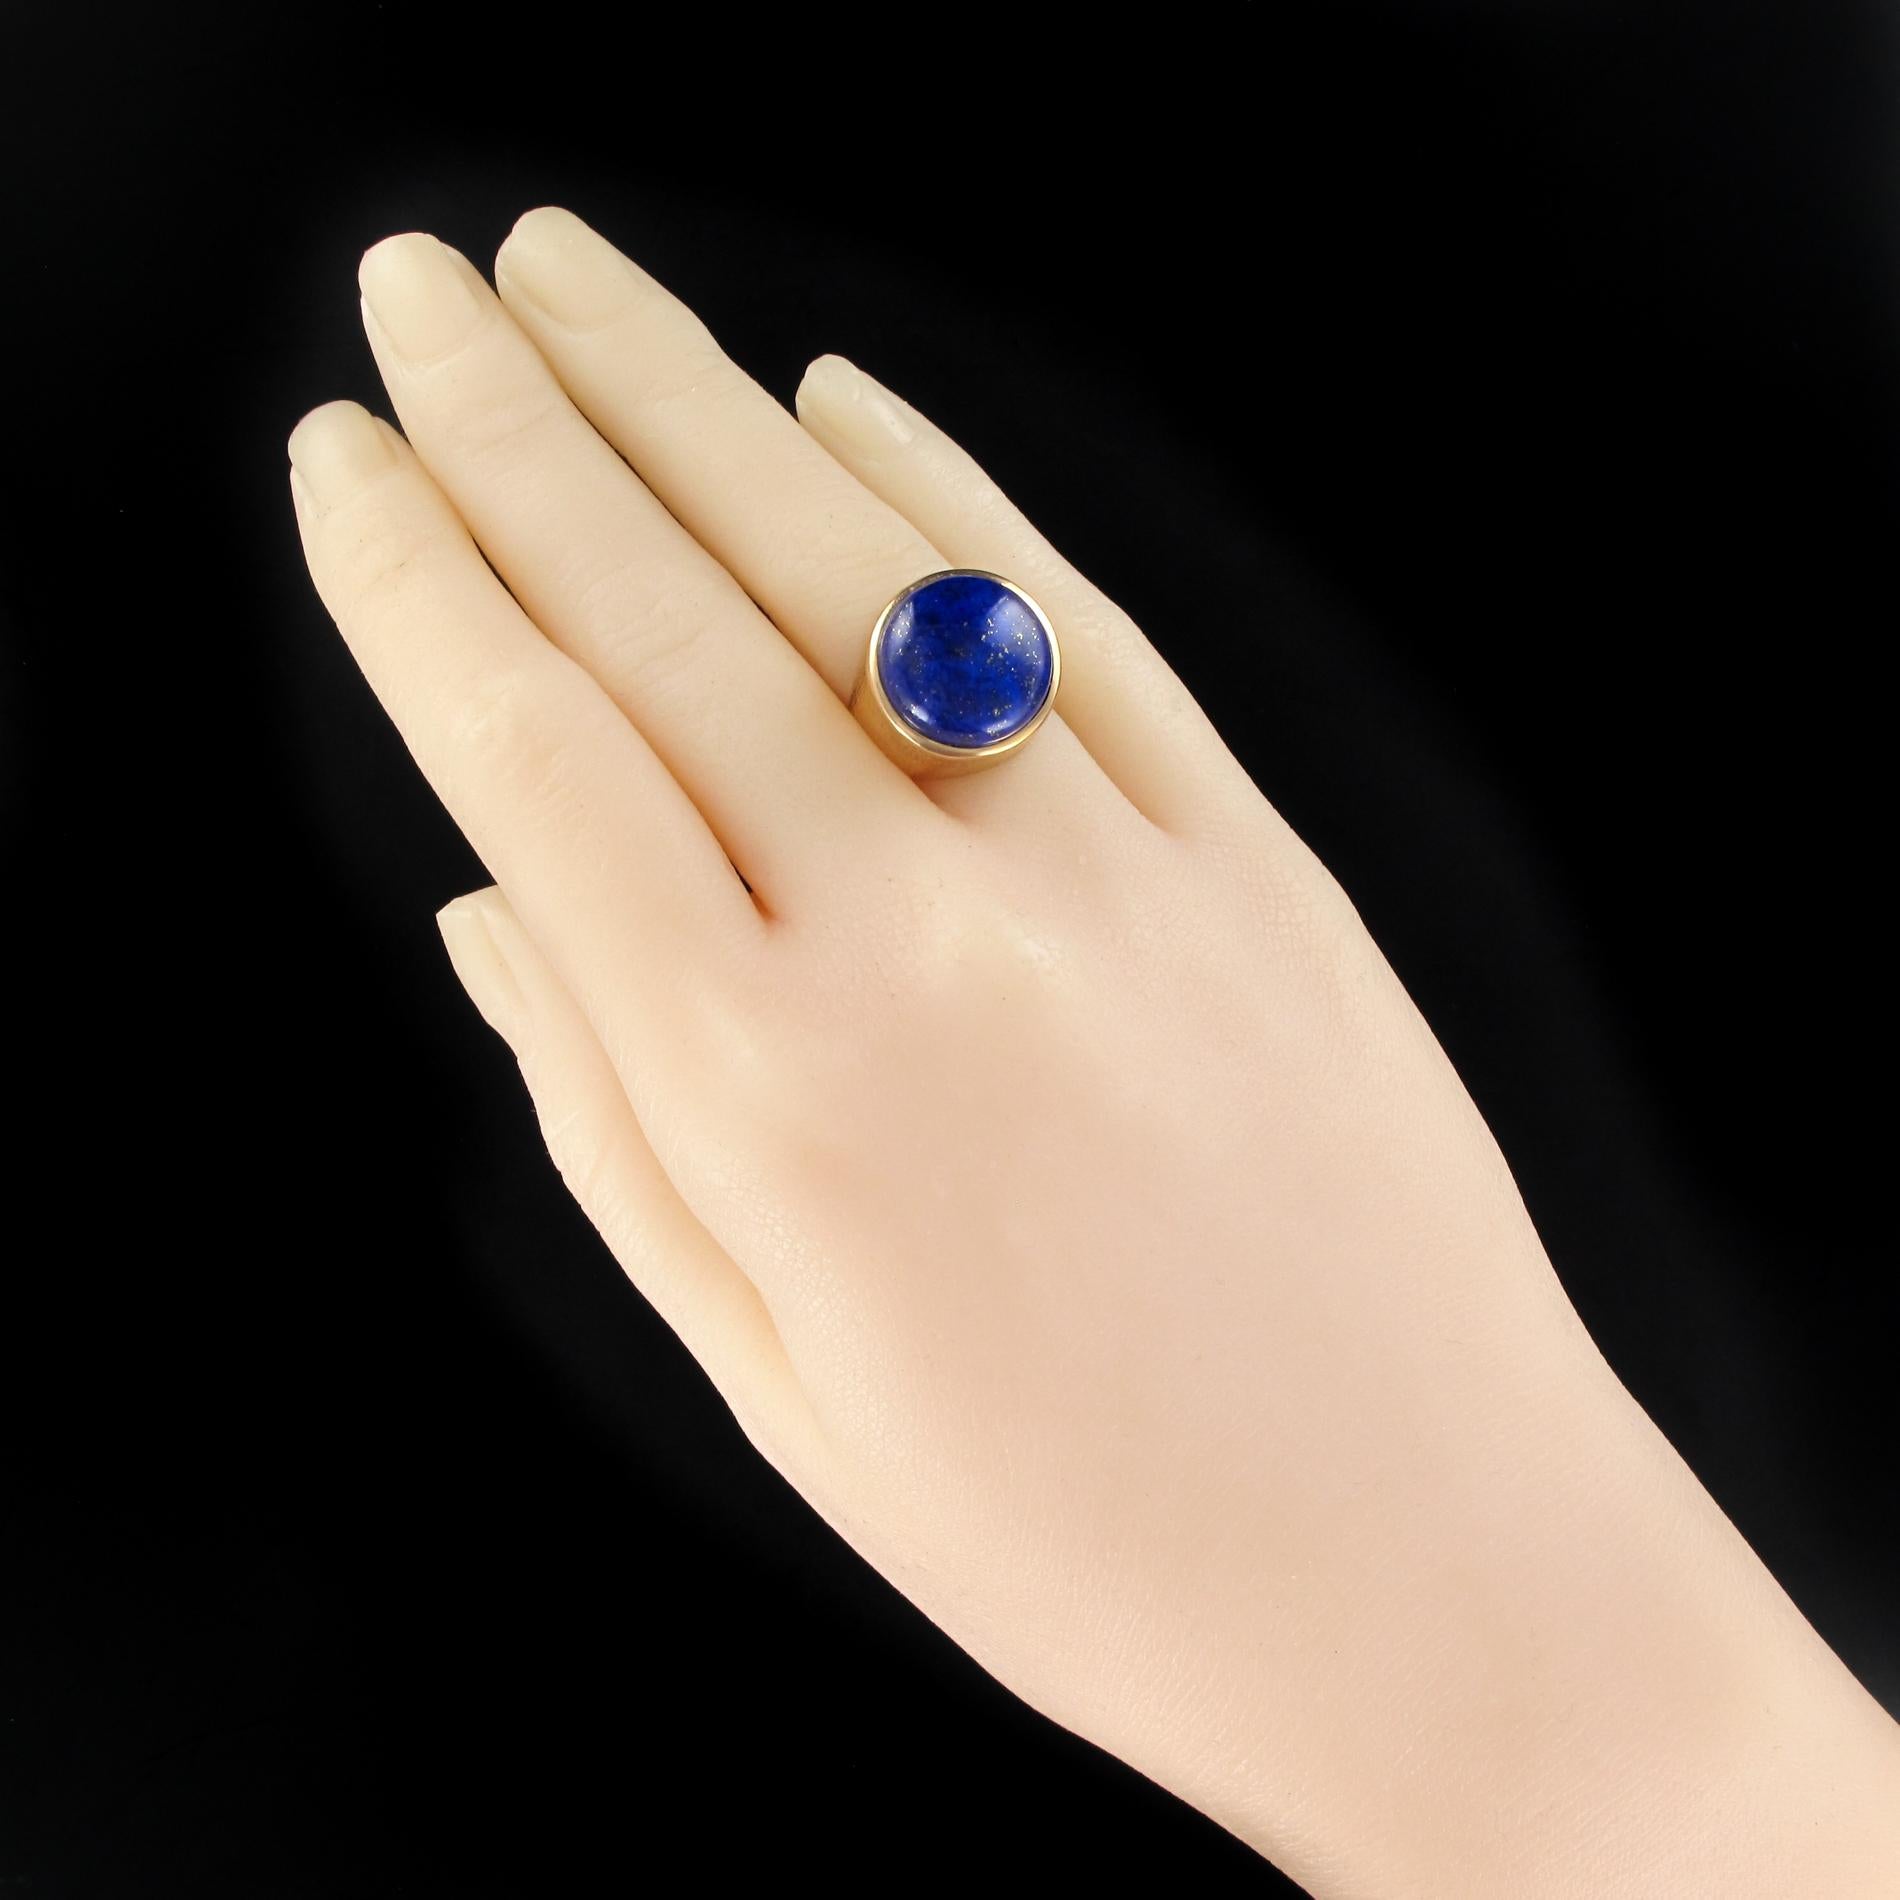 Ring in 18 karats yellow gold, eagle's head hallmark.
Lovely signet ring, it is closed set on its top with a flat cabochon lapis lazuli. The entire frame is crafted with precision and refinement.
Height: 17.1 mm, width: 17.3 mm, thickness: about 10